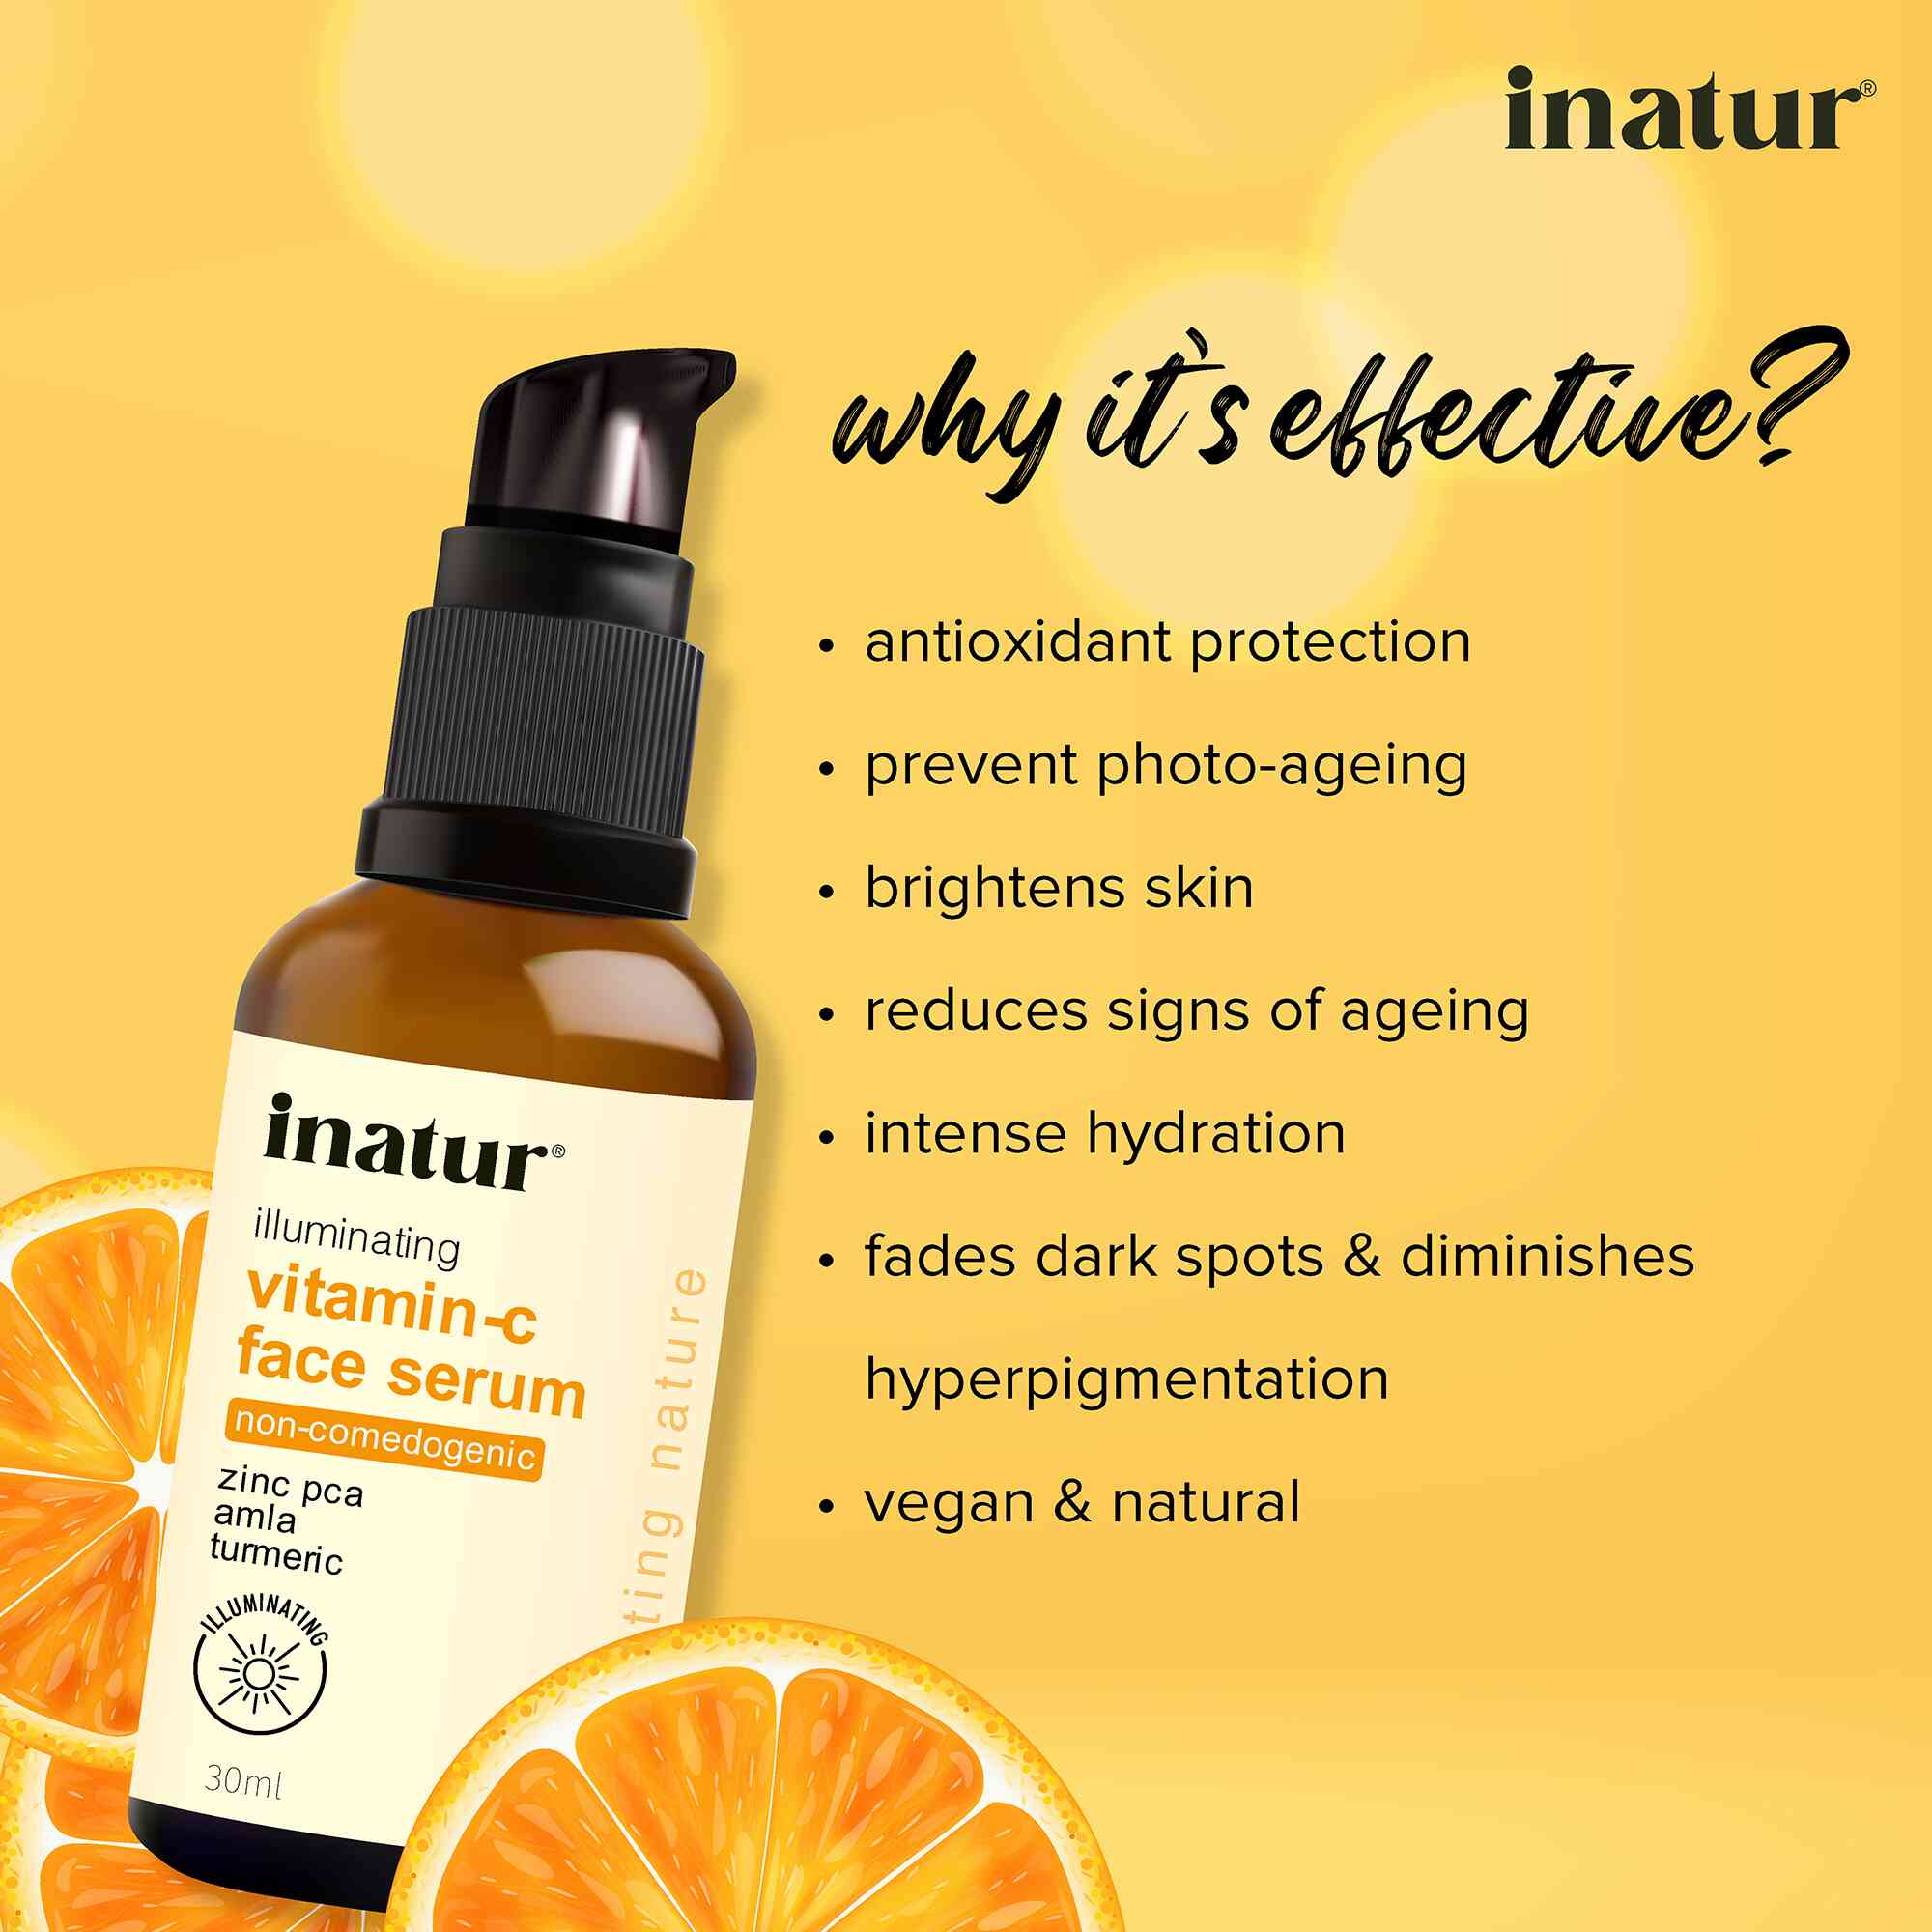 why inatur vitamin c face serum is effective